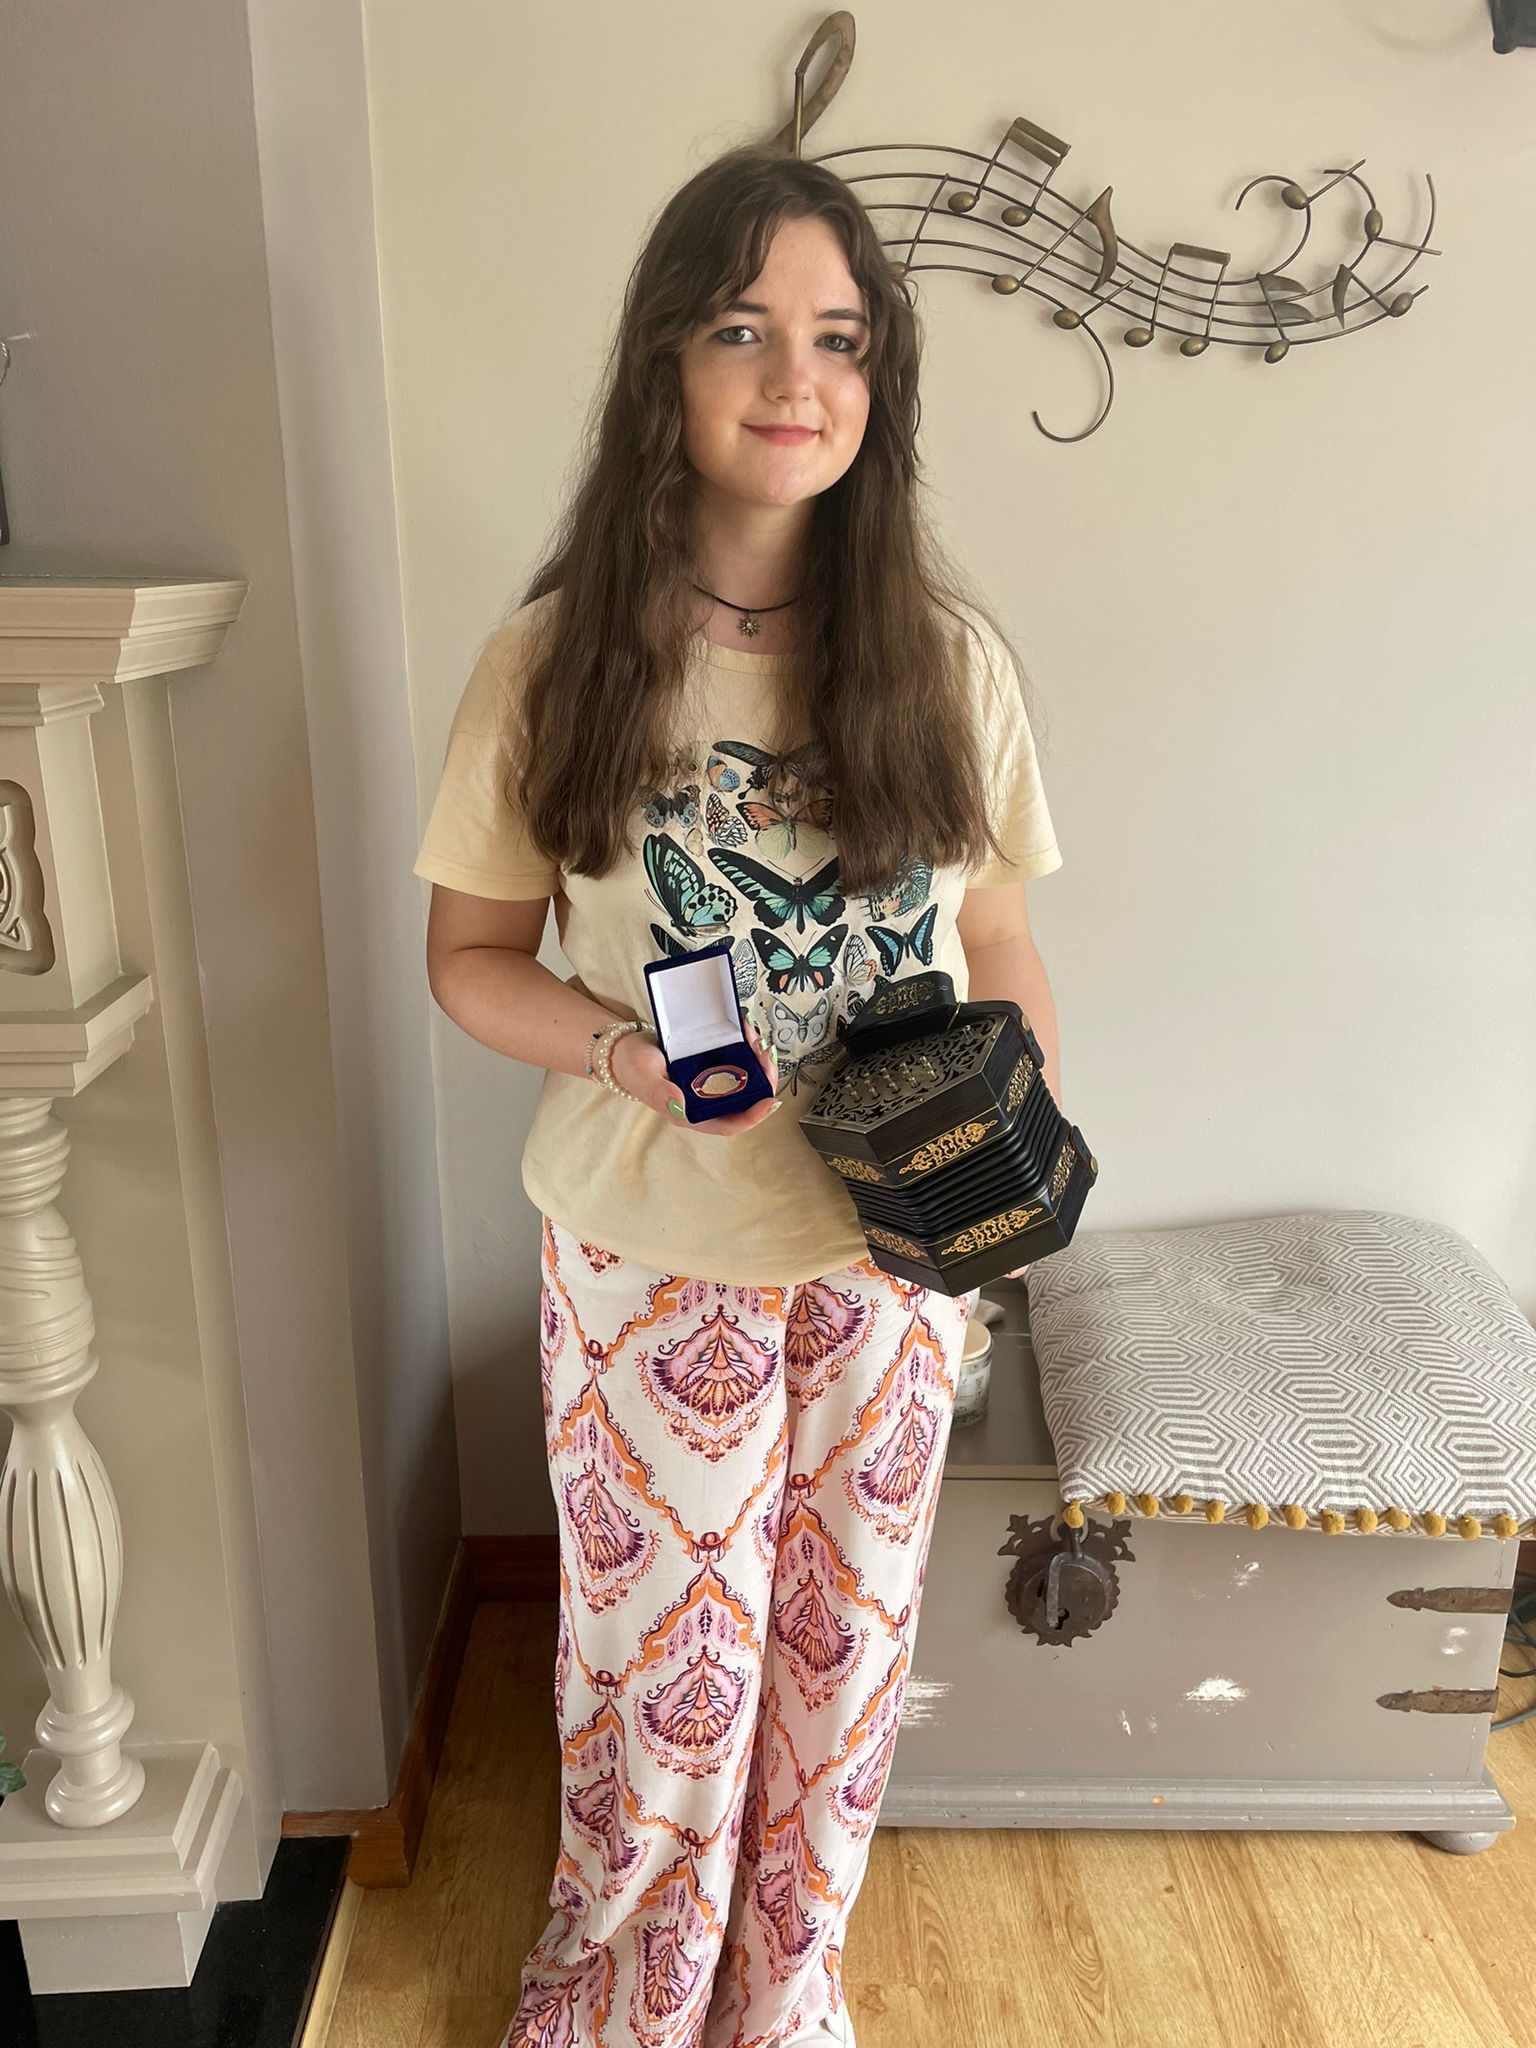 Ulster Champion Erin Whitley Irvinestown CCÉ 1st 15-18 Concertina and 1st 15-18 Melodeon at the Ulster Fleadh in Dromore held at the weekend. Erin goes forward to compete at the All Ireland Fleadh held in Mullingar in August.